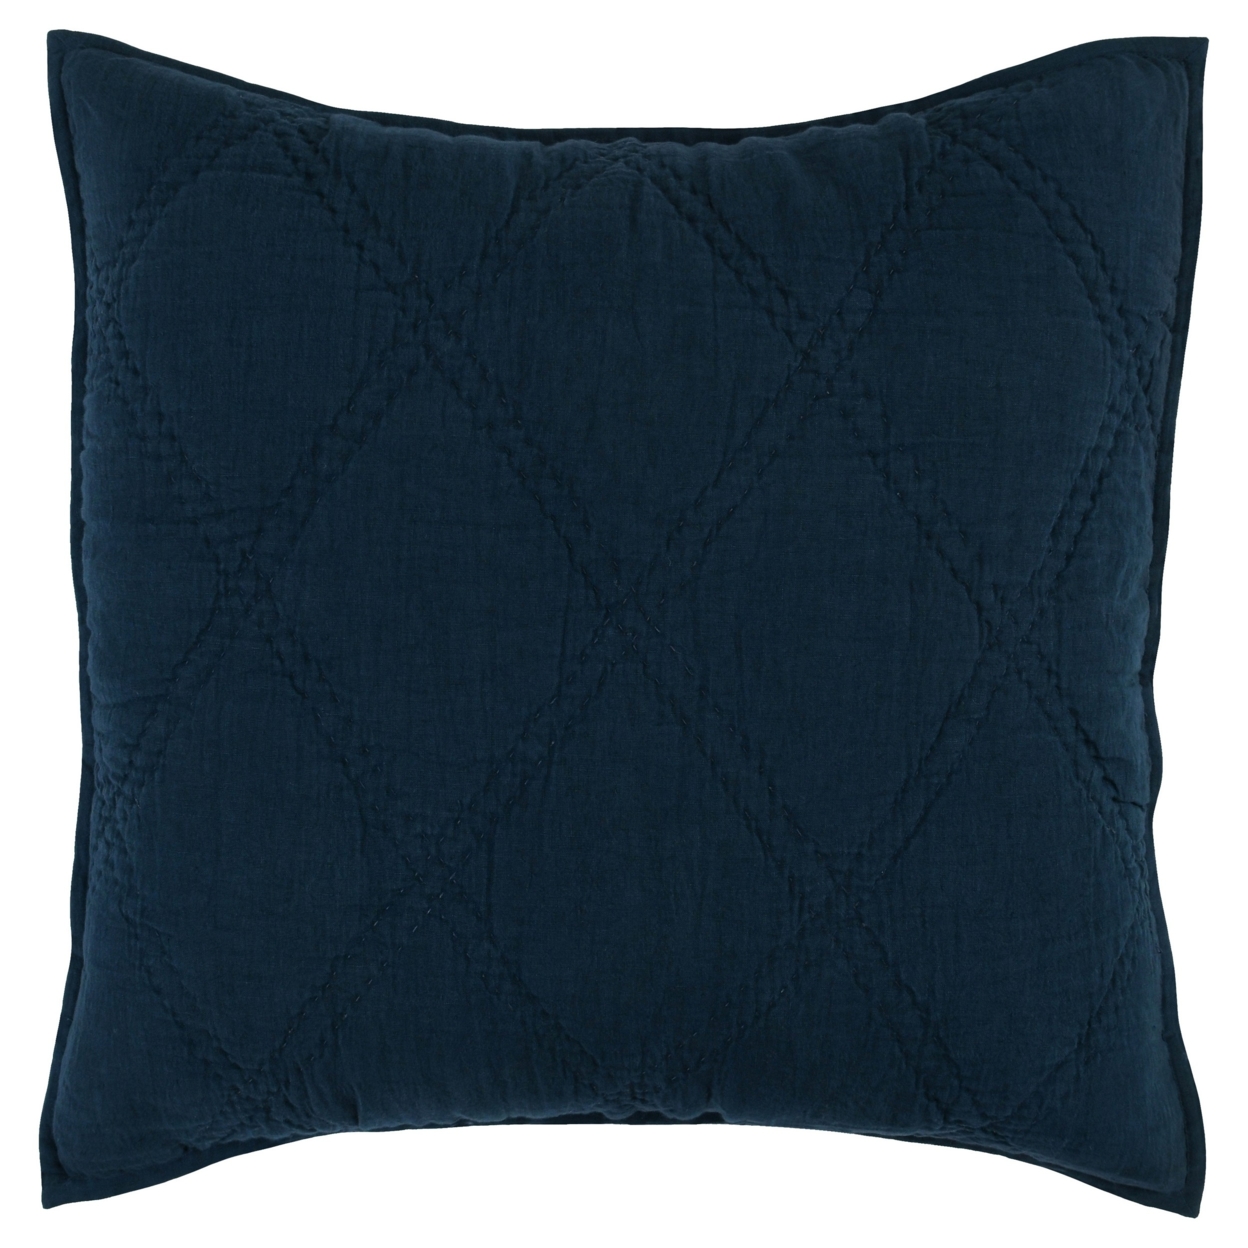 Hara 26 Inch Hand Quilted Euro Pillow Sham With Polyester Fill, Dark Blue- Saltoro Sherpi